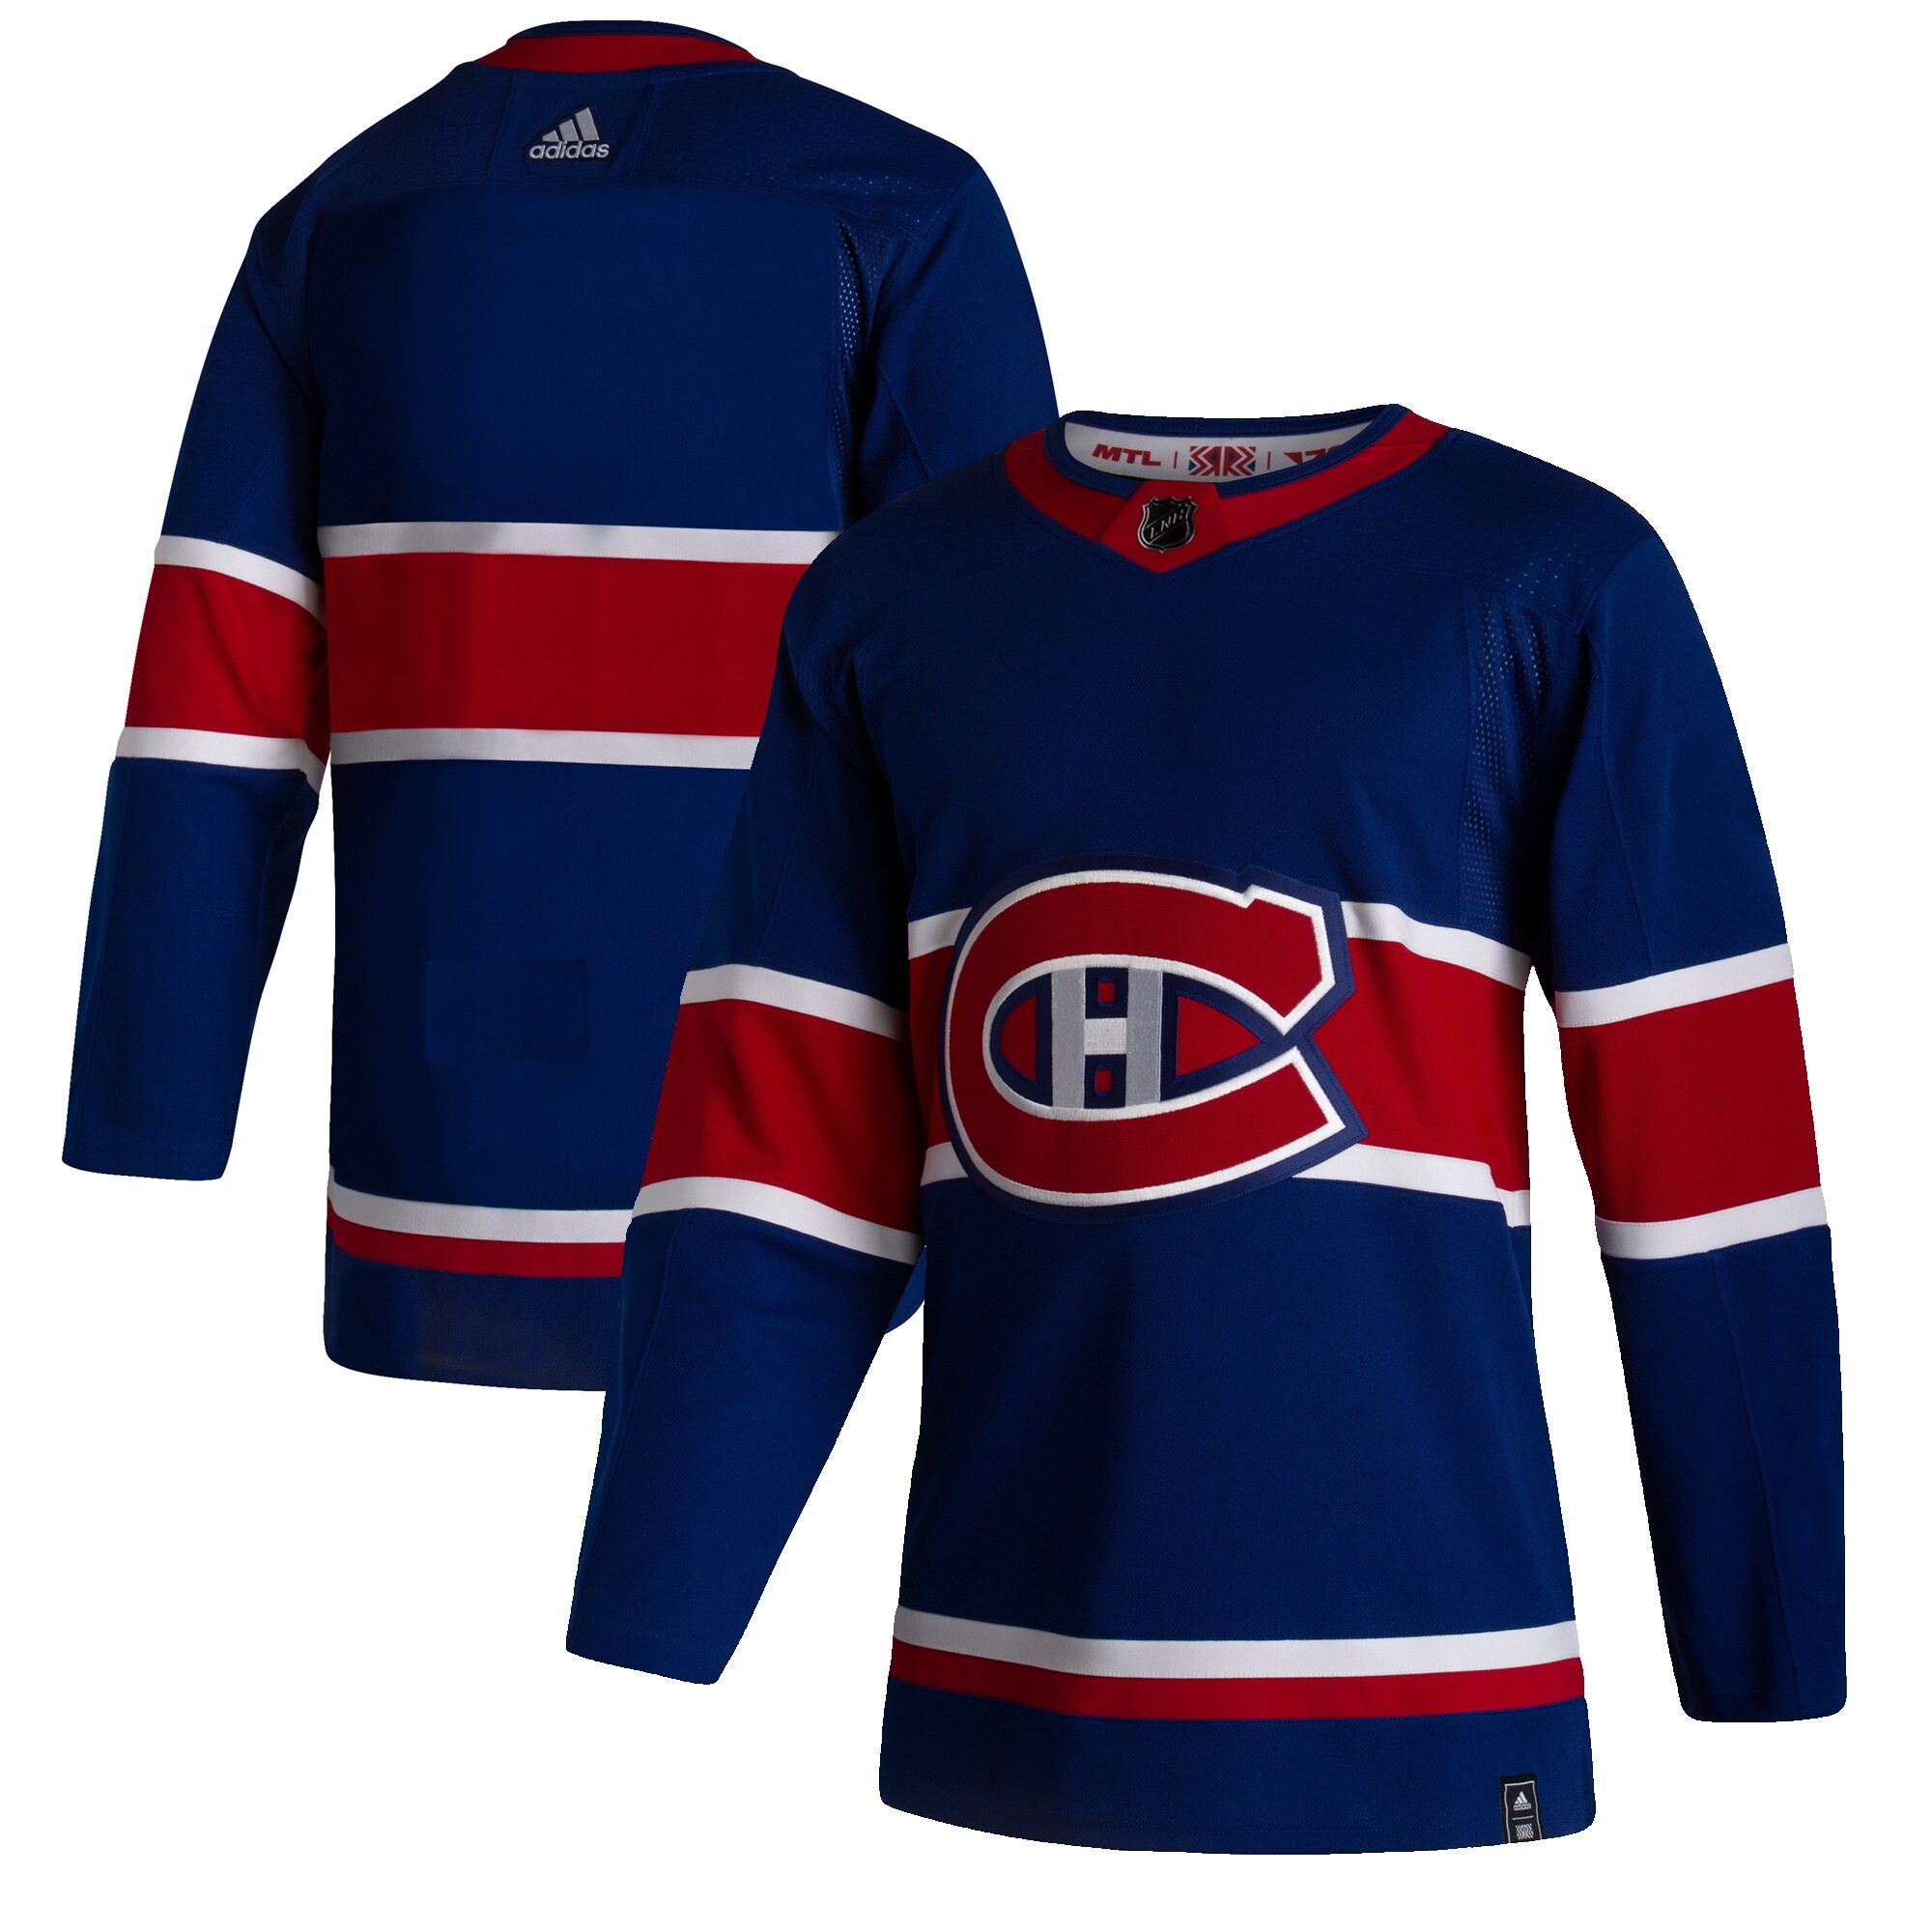 Montreal Candiens fans need to check out these new ‘Reverse Retro’ []jerseys<img src=